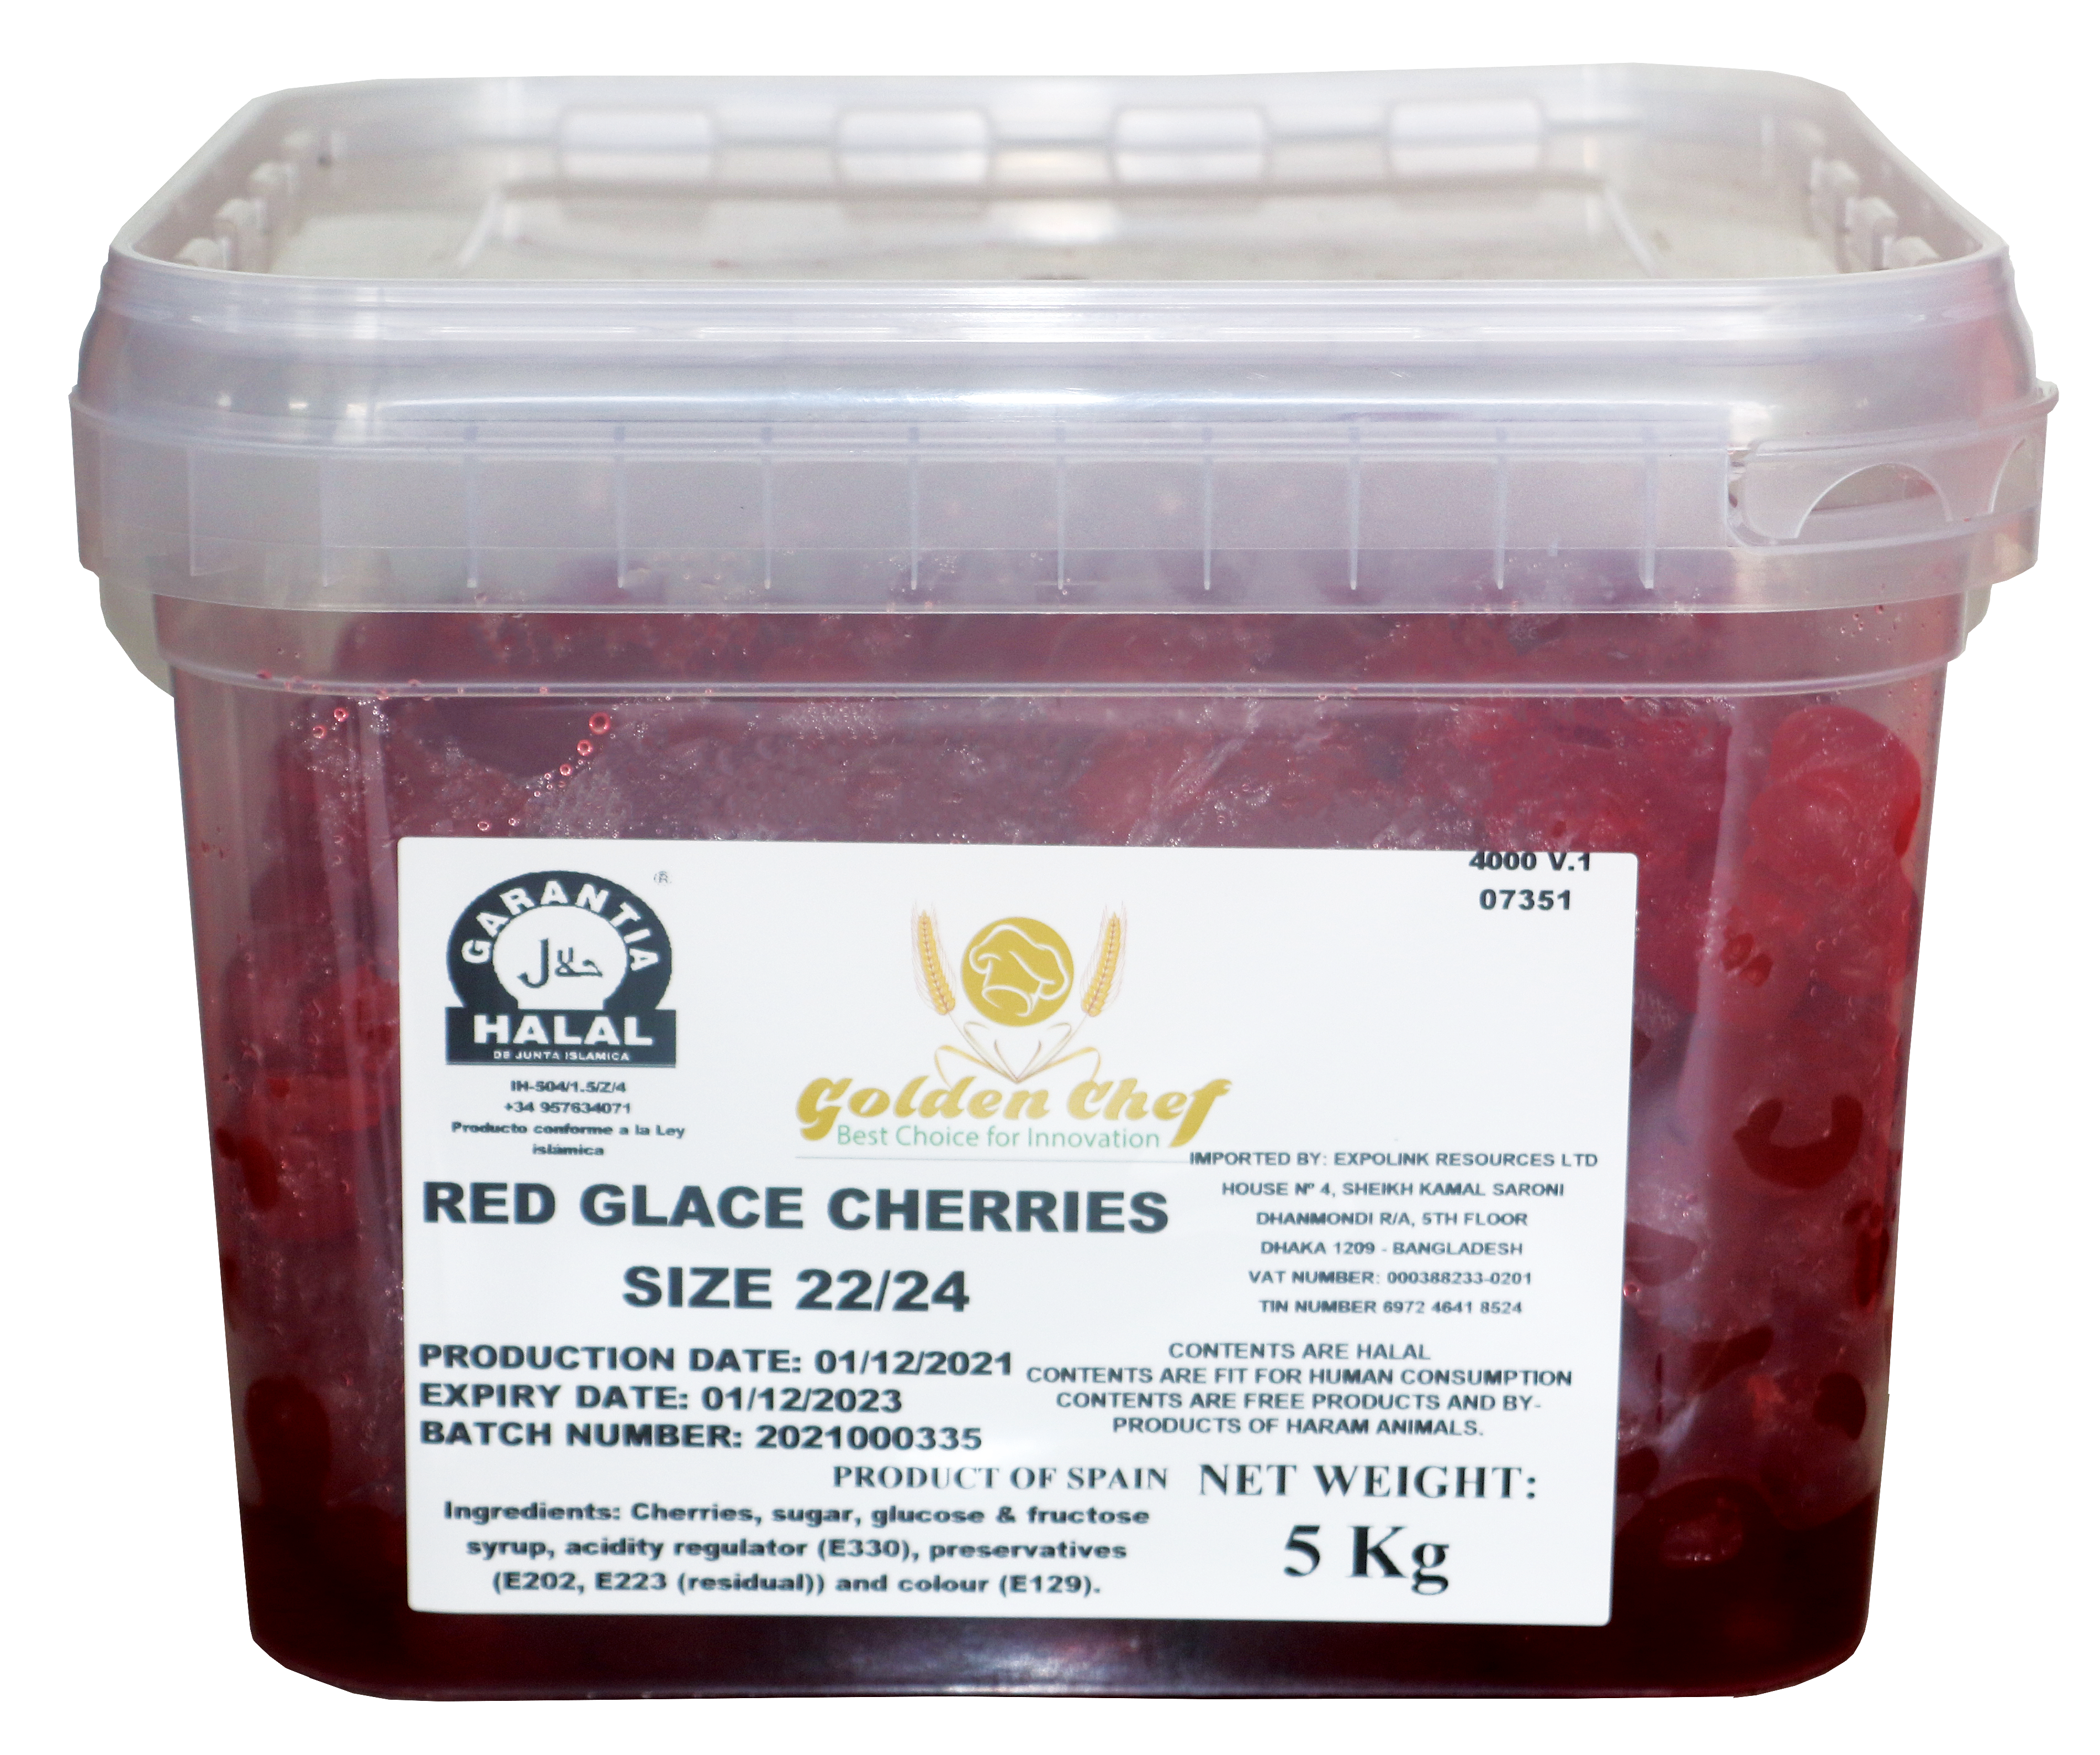 Golden Chef Red Glace Cherries